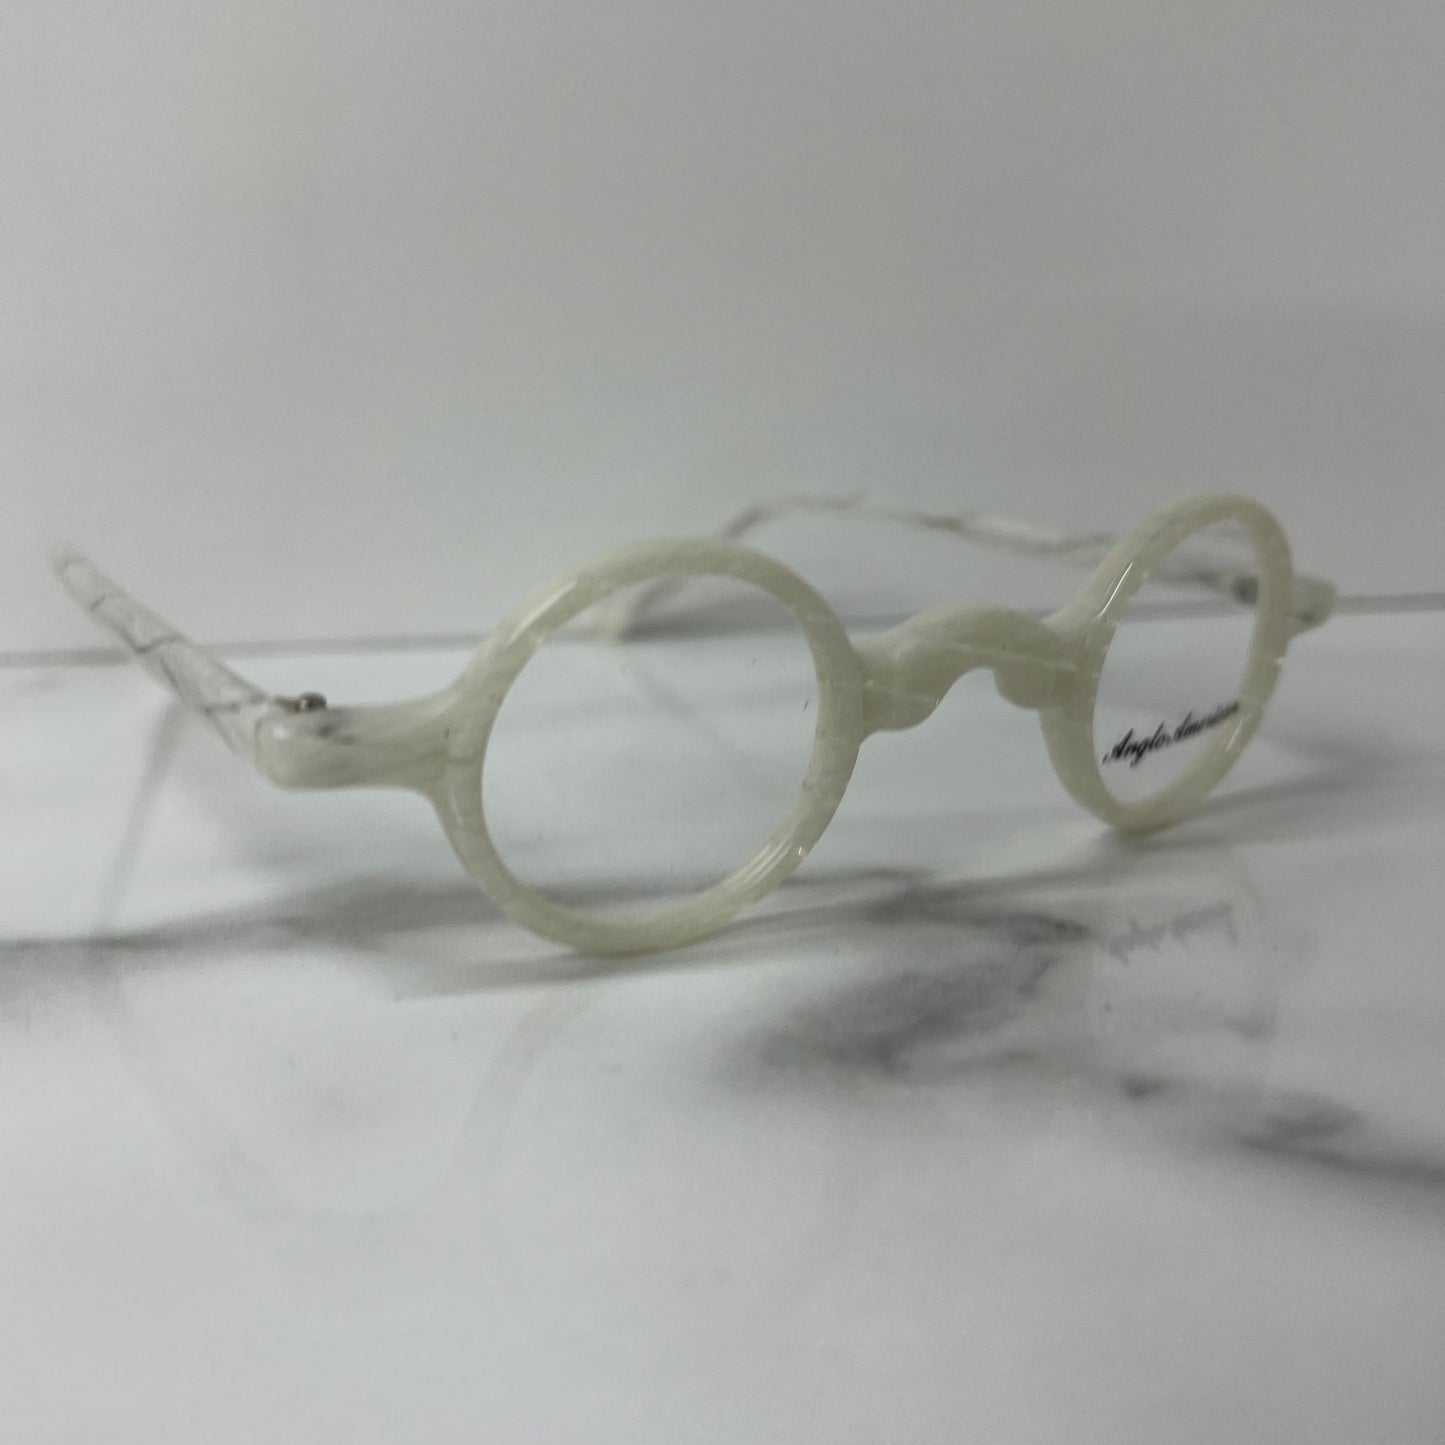 Anglo American Groucho Glasses Frames Round London Eyewear.